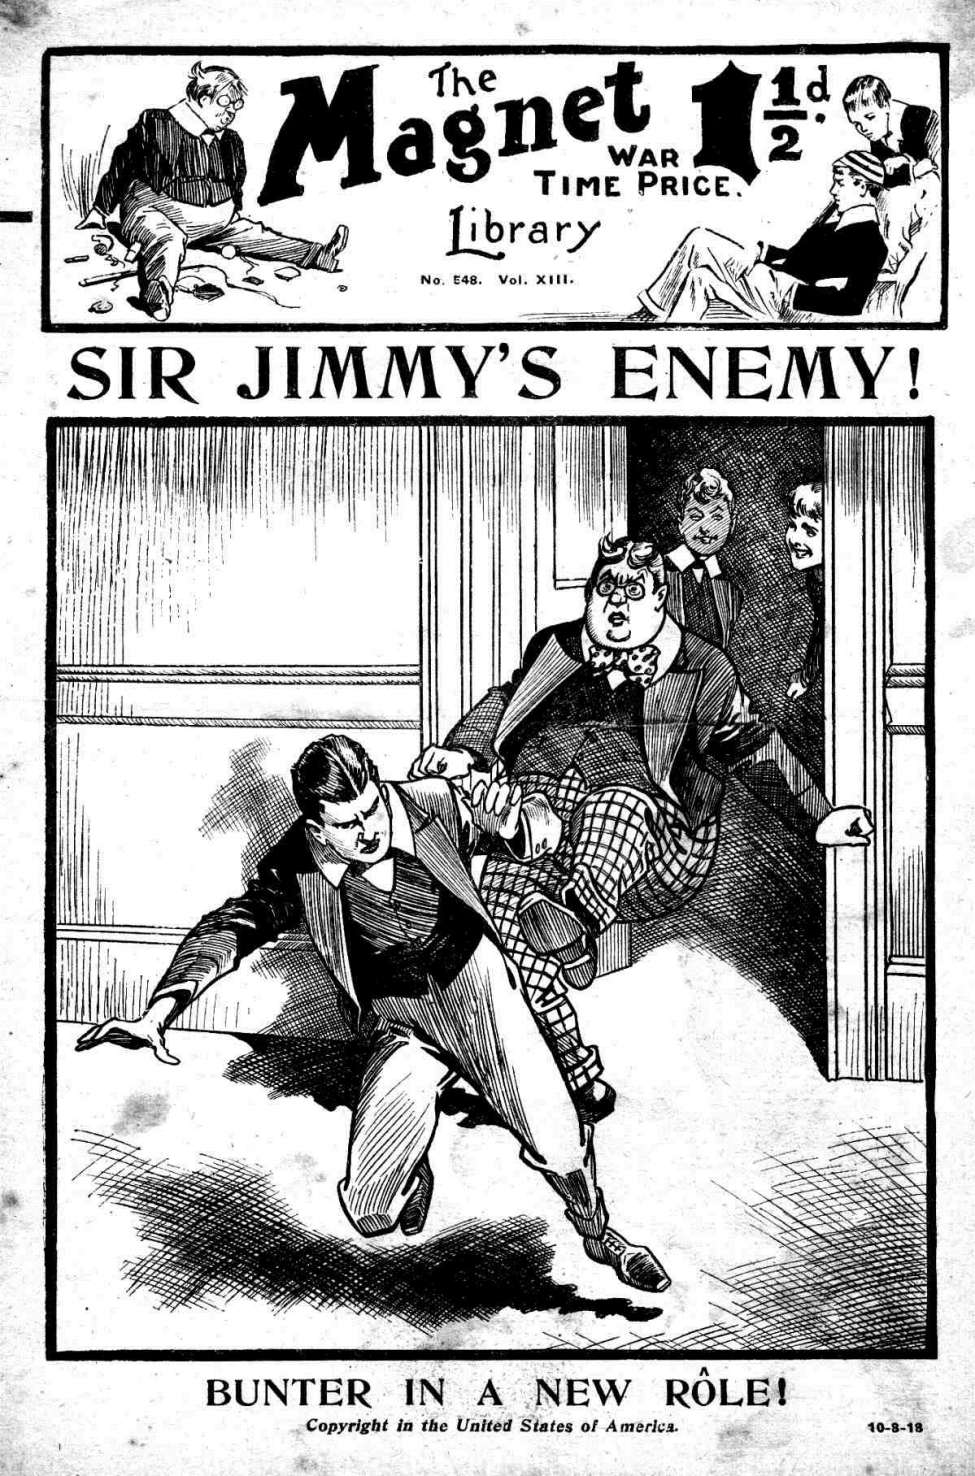 Book Cover For The Magnet 548 - Sir Jimmy's Enemy!